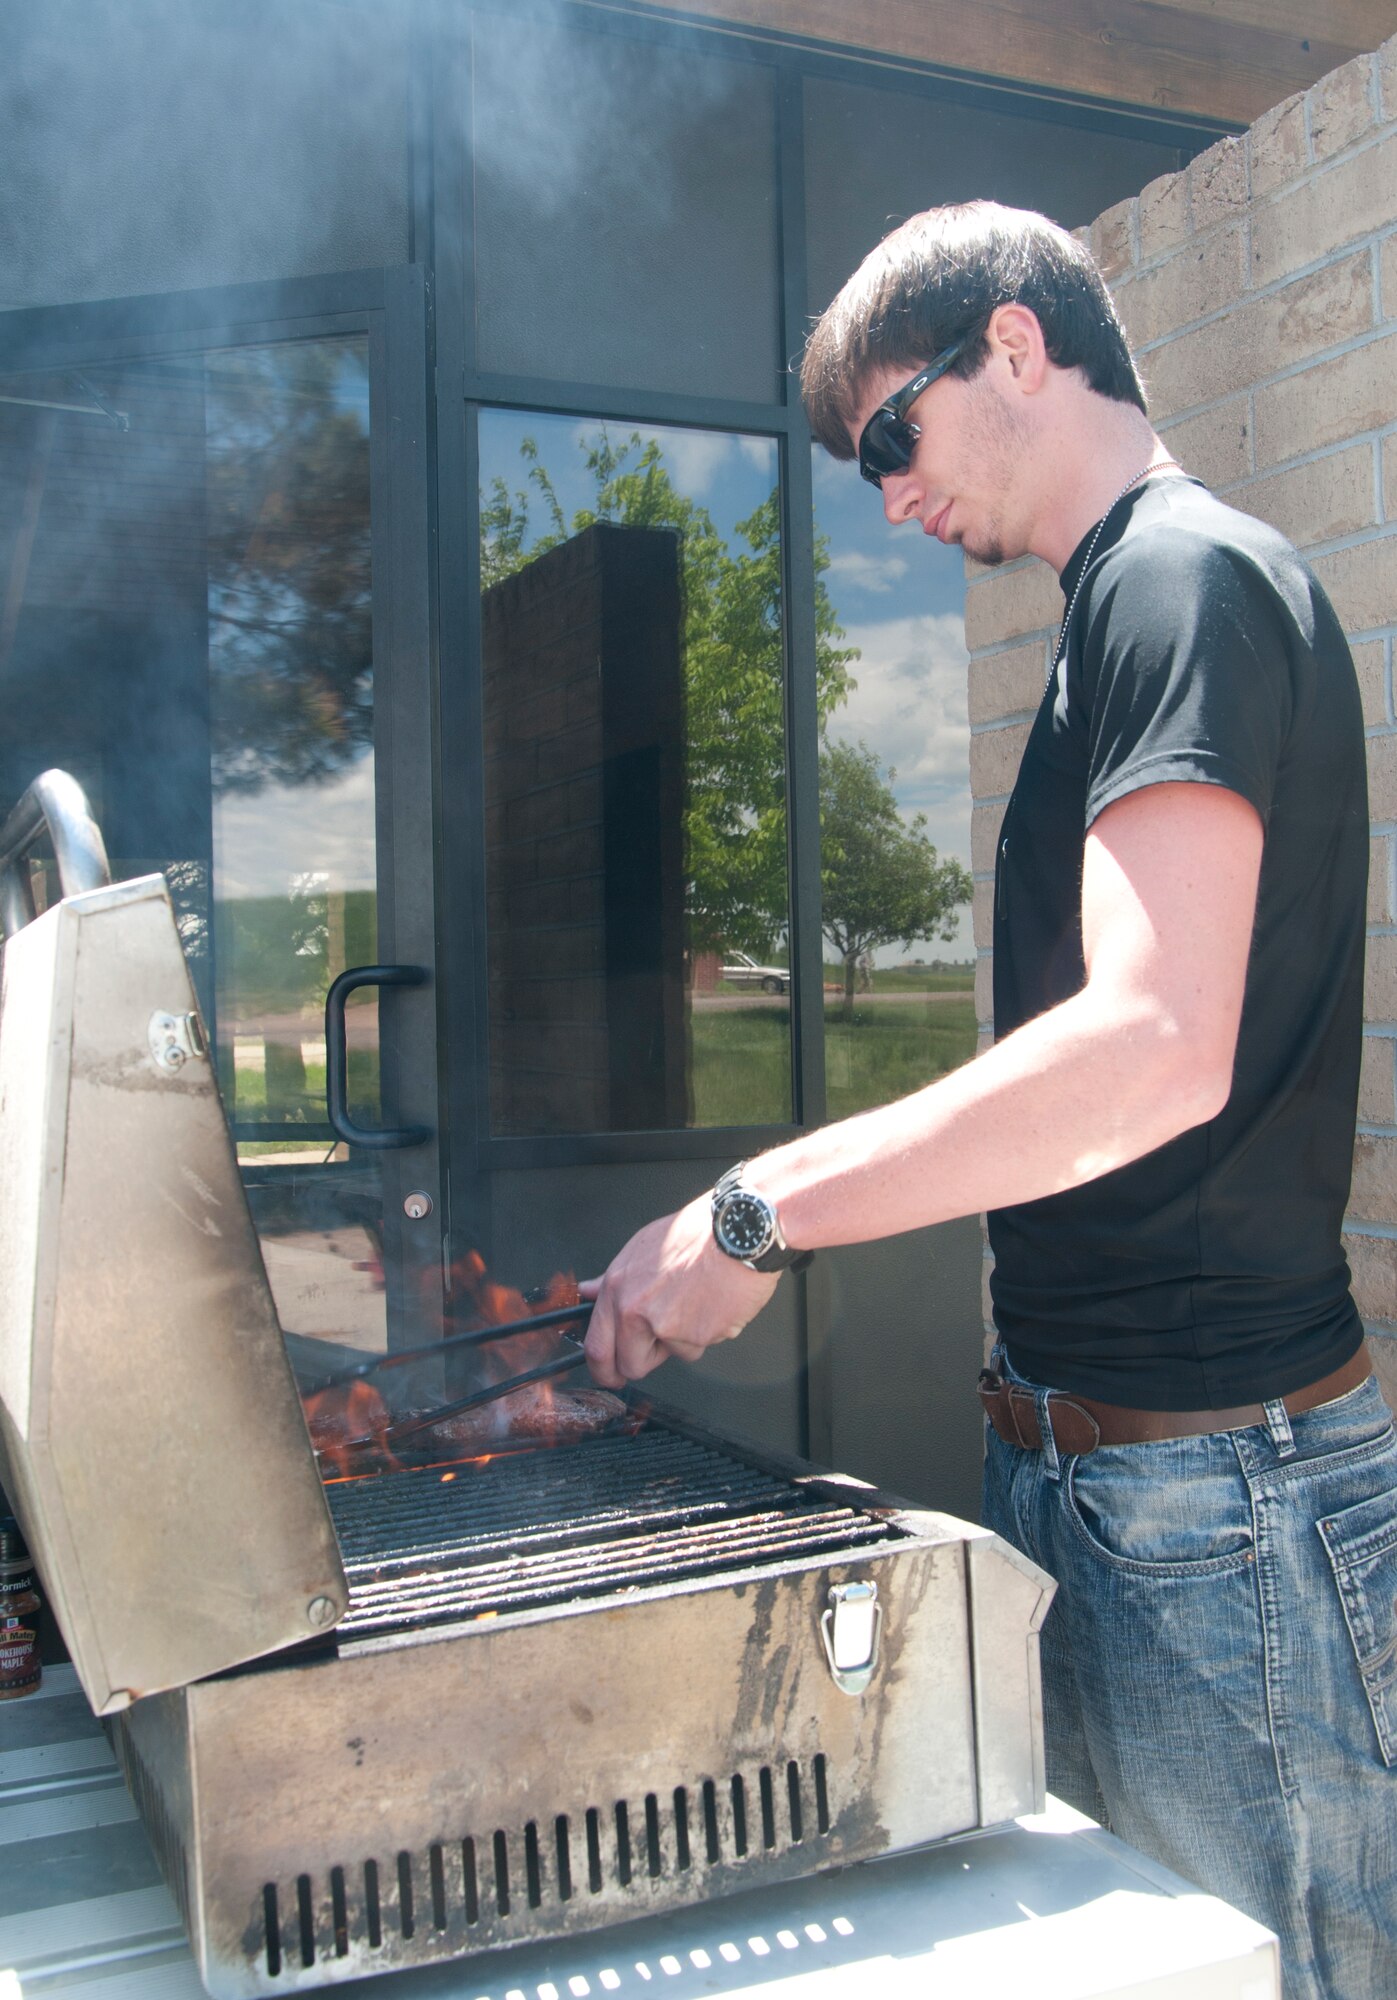 Kyle, son of Gus Schliffke, 90th Force Support Squadron Outdoor Recreation, barbecues hamburgers and hot dogs for people attending Outdoor Rec's Father's Day Fishing Derby June 15, 2014, at the F.E. Warren Base Lake. (U.S. Air Force photo by Airman 1st Class Jason Wiese)